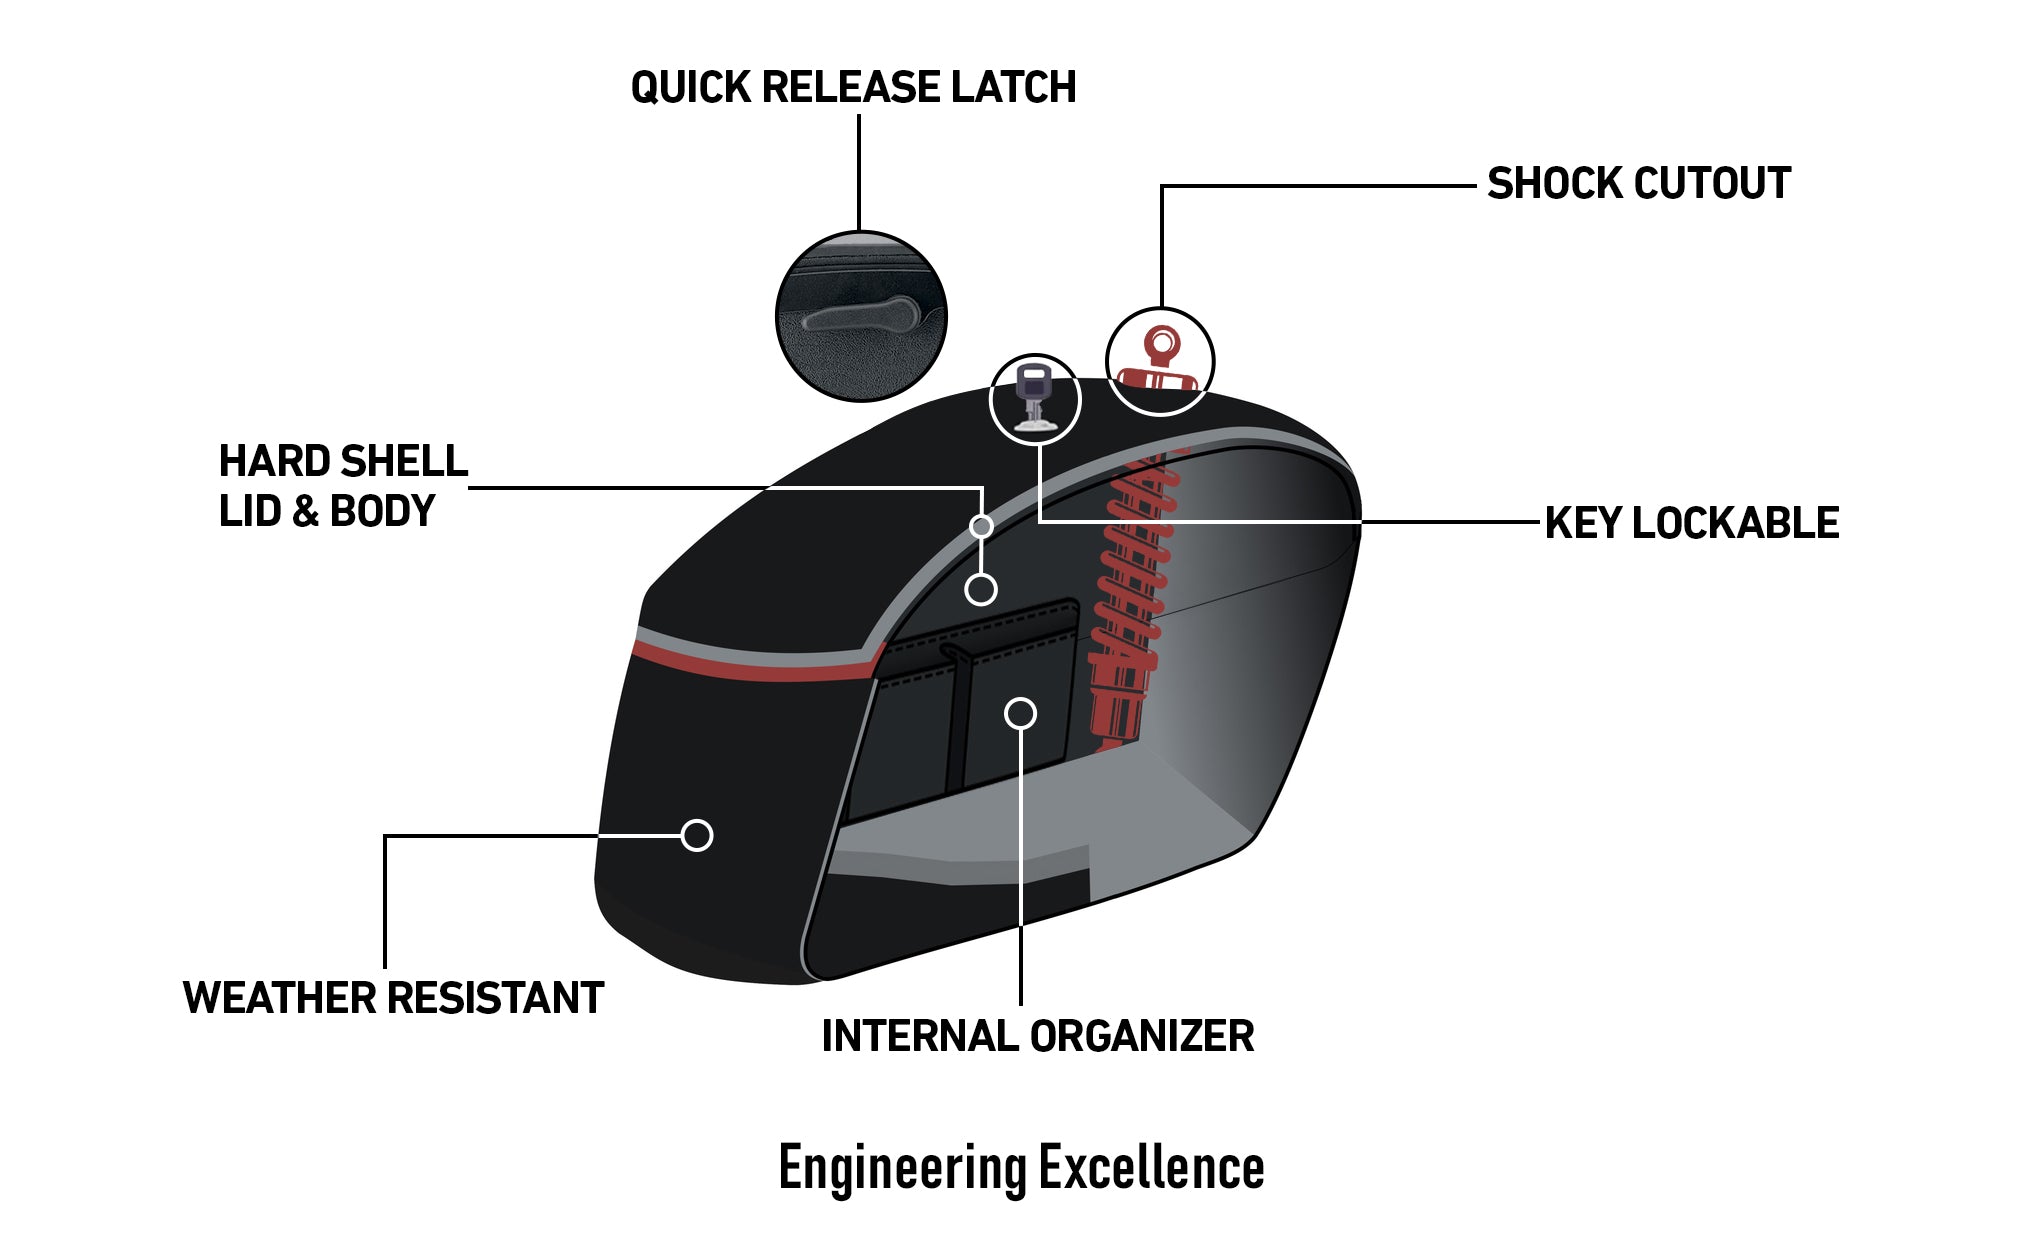 Viking Lamellar Vale Extra Large Shock Cut Out Leather Covered Motorcycle Hard Saddlebags For Harley Dyna Switchback Fld Engineering Excellence with Bag on Bike @expand